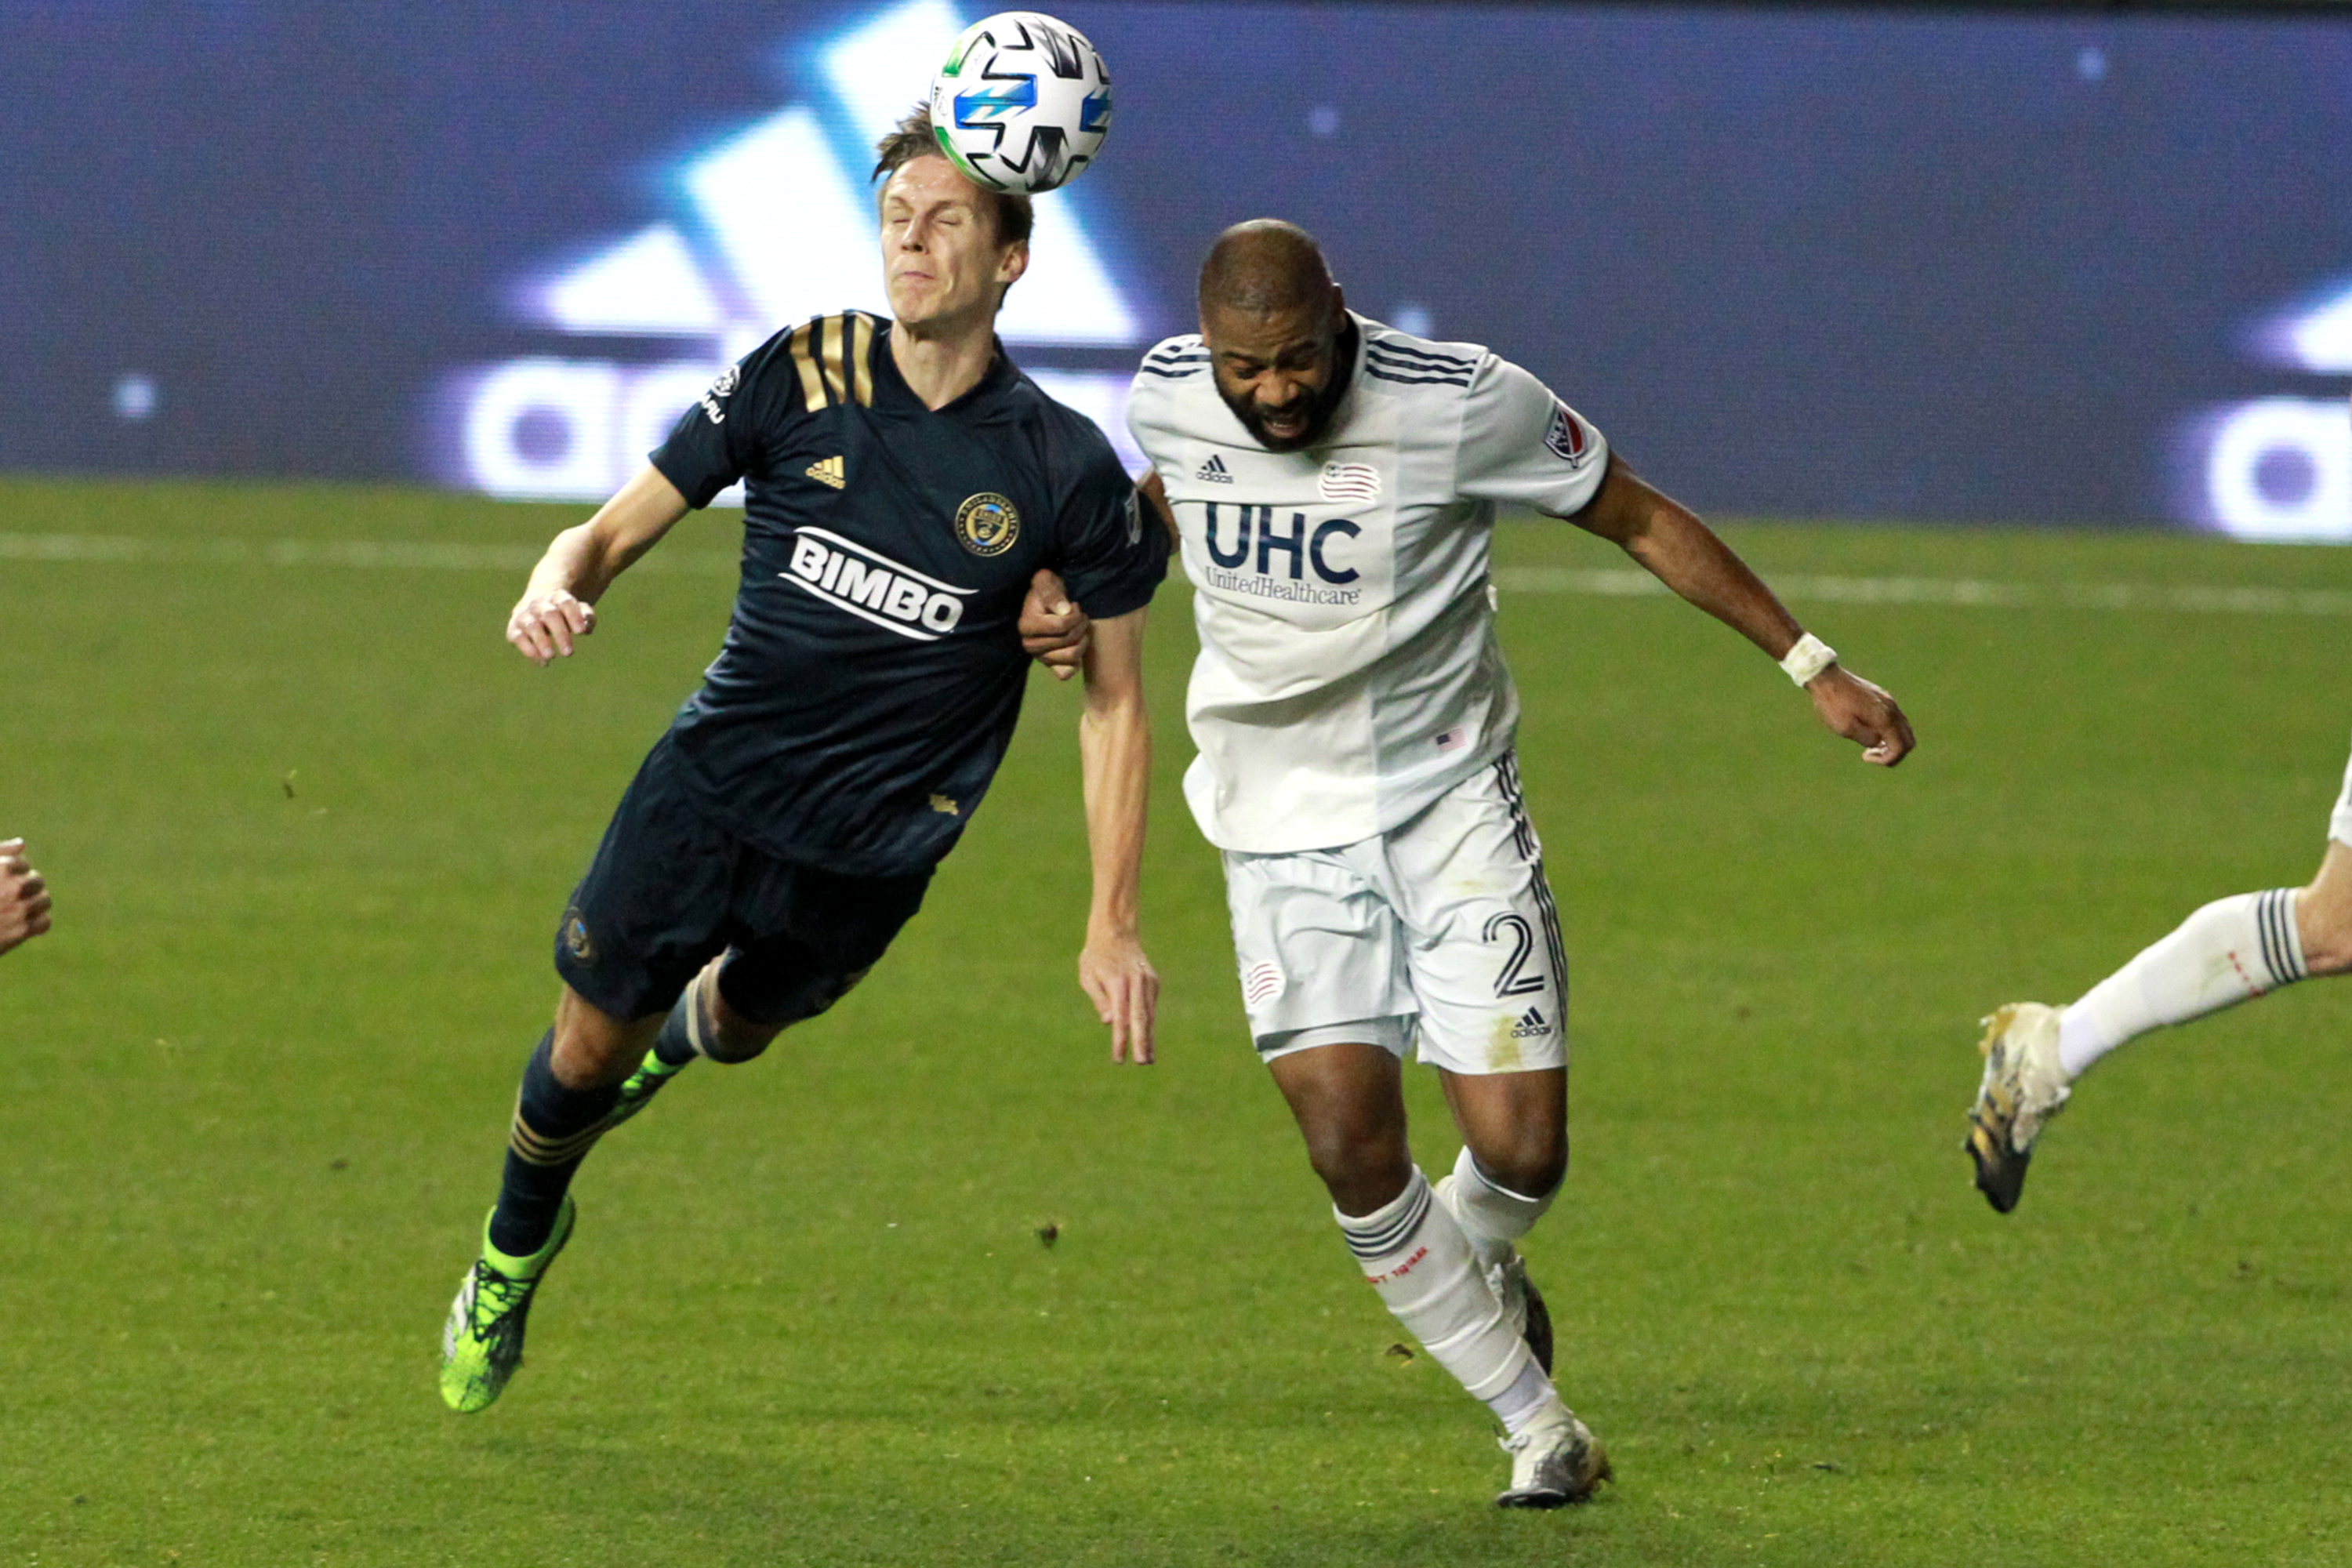 Union II heads to New England for MLS Season Pass debut